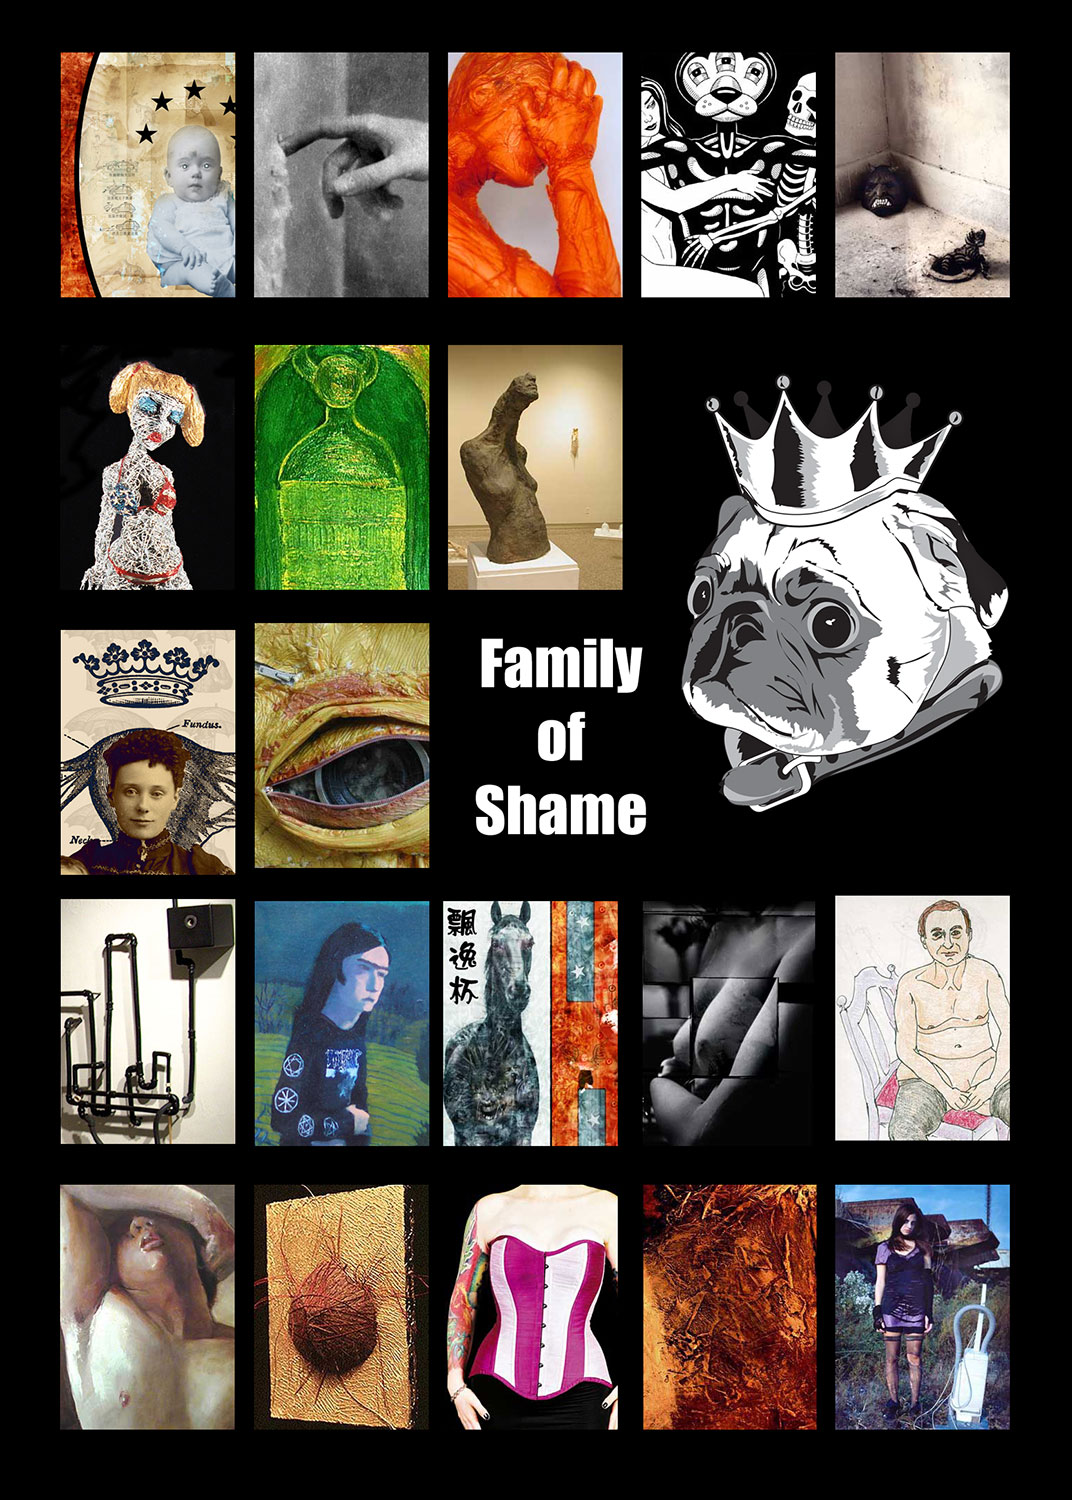 Family of Shame Subversive Arts Conglomerate